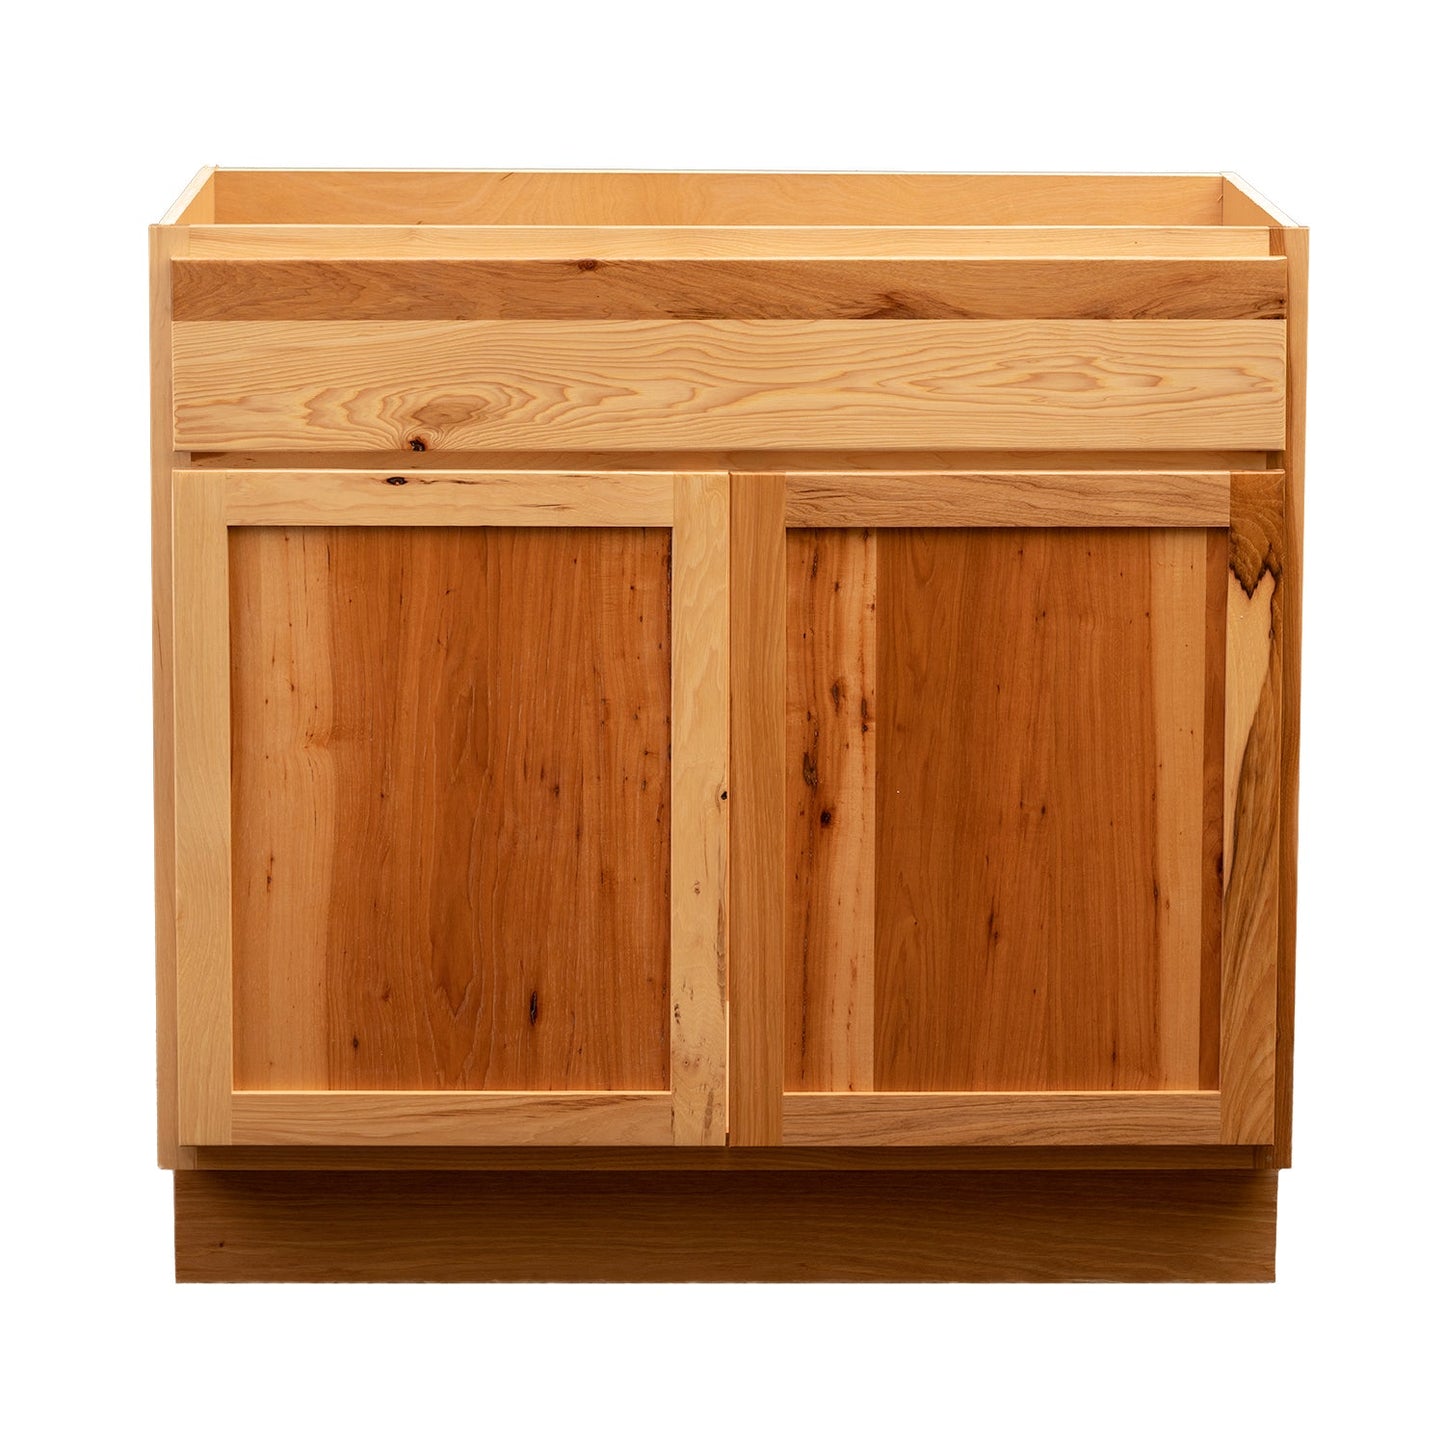 Quicklock RTA (Ready-to-Assemble) Rustic Hickory Vanity Base Cabinet | 30"Wx34.5"Hx21"D